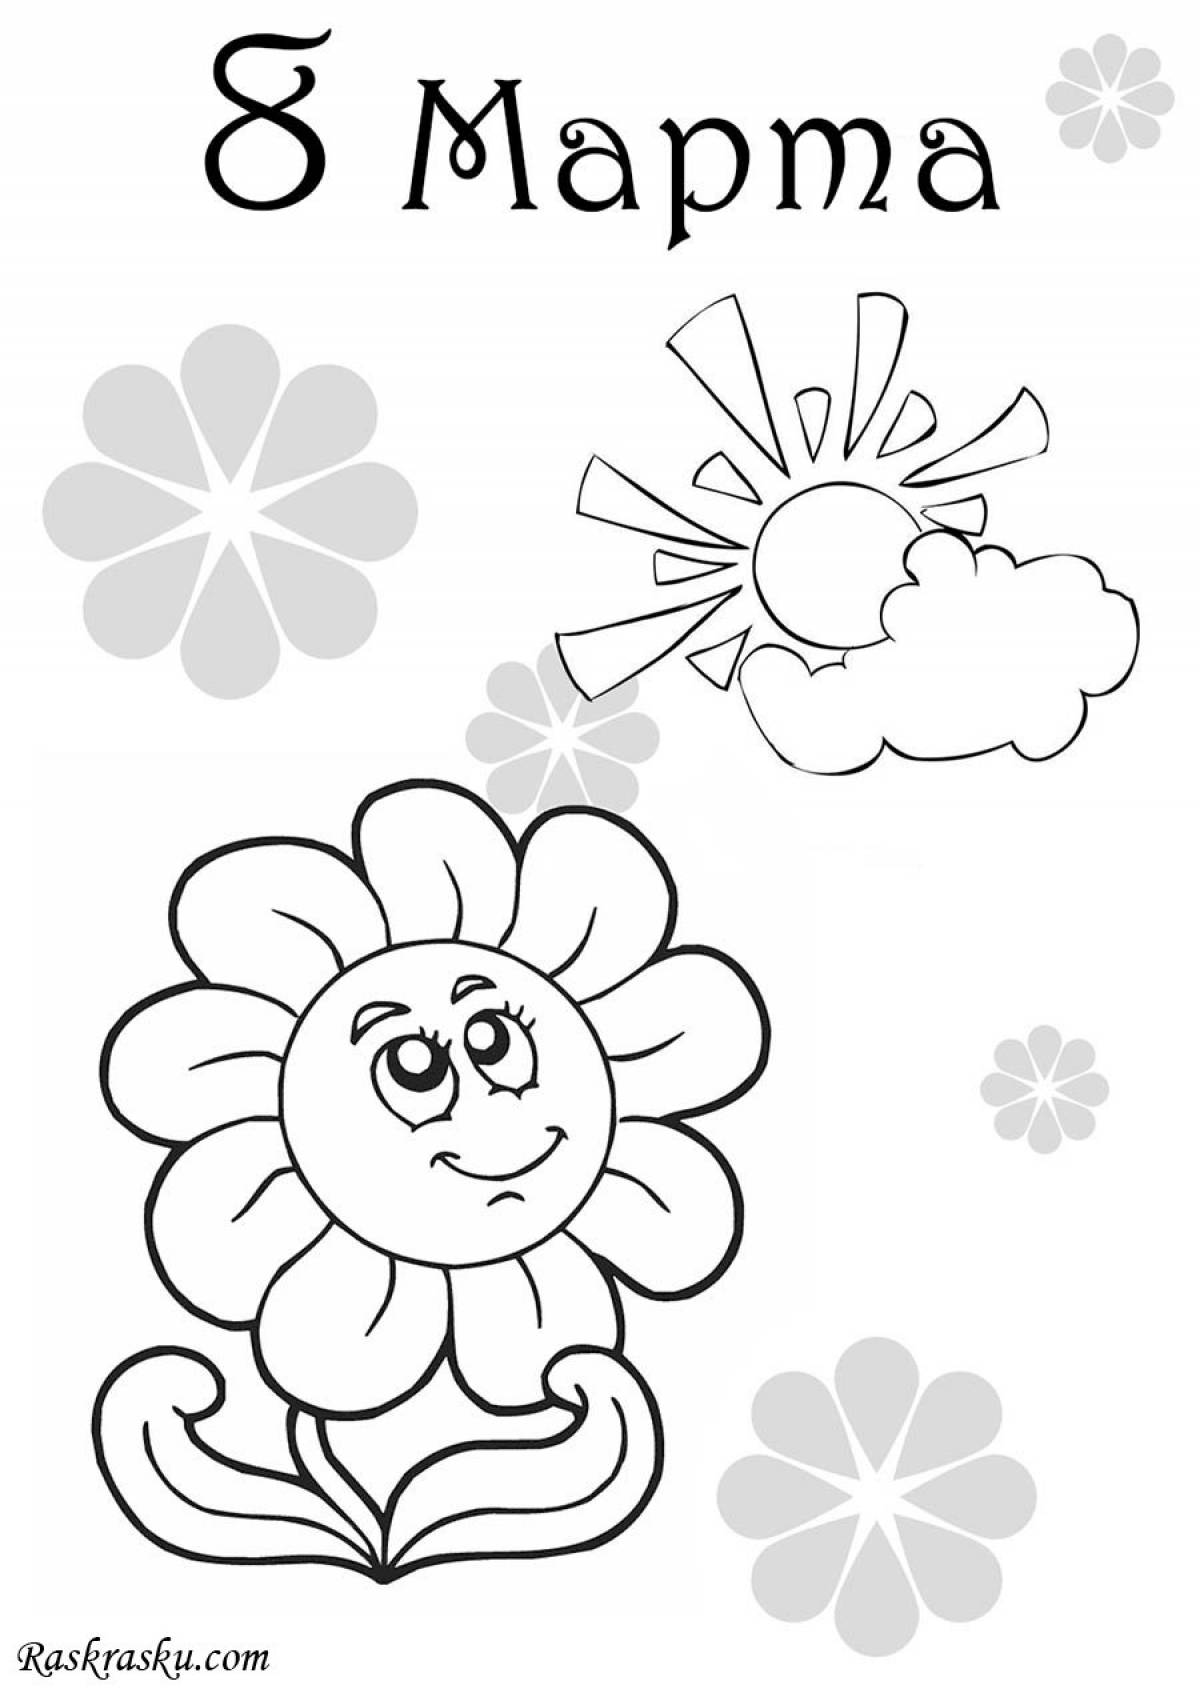 Coloring pages for March 8th